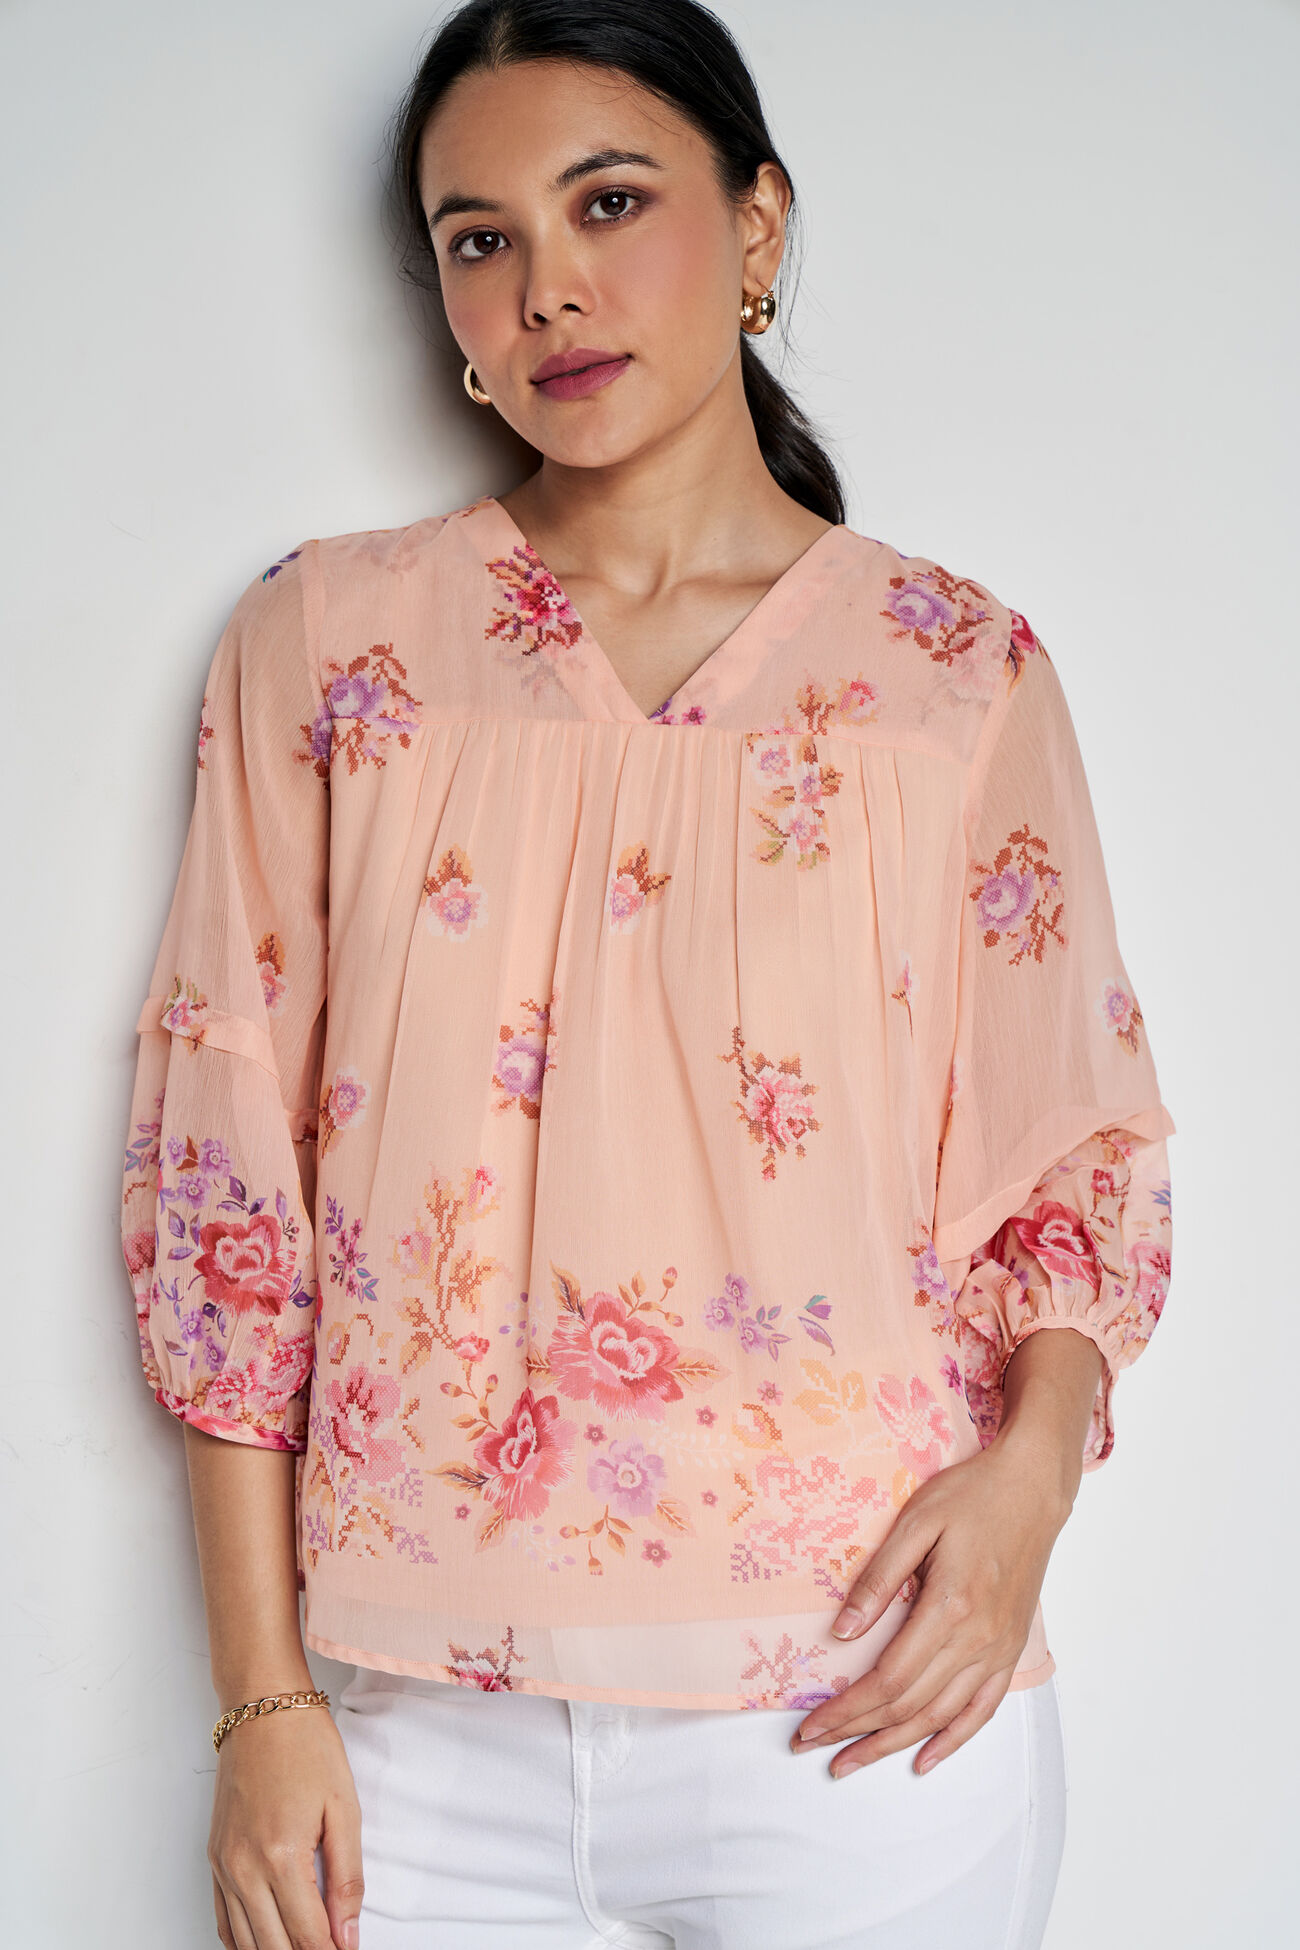 Sunup Floral Top, Peach, image 2